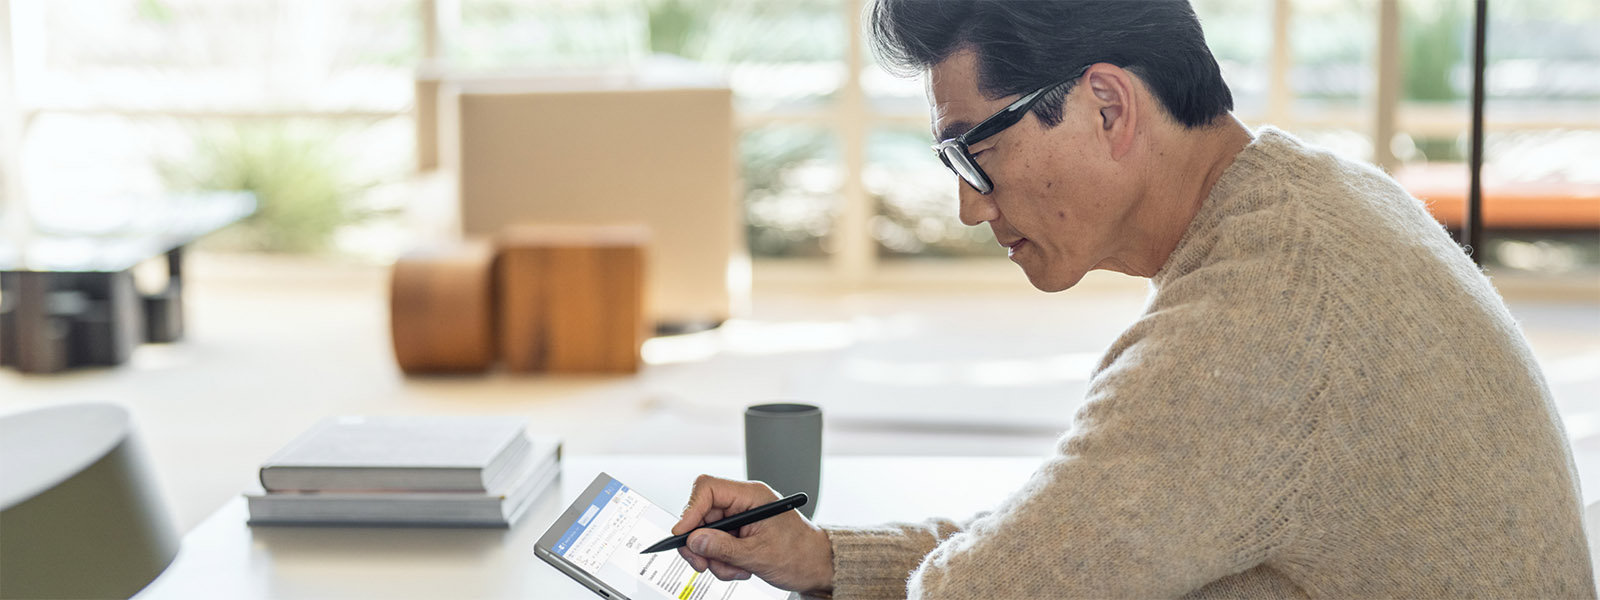 Man sitting at table using a Surface pen on his Surface device